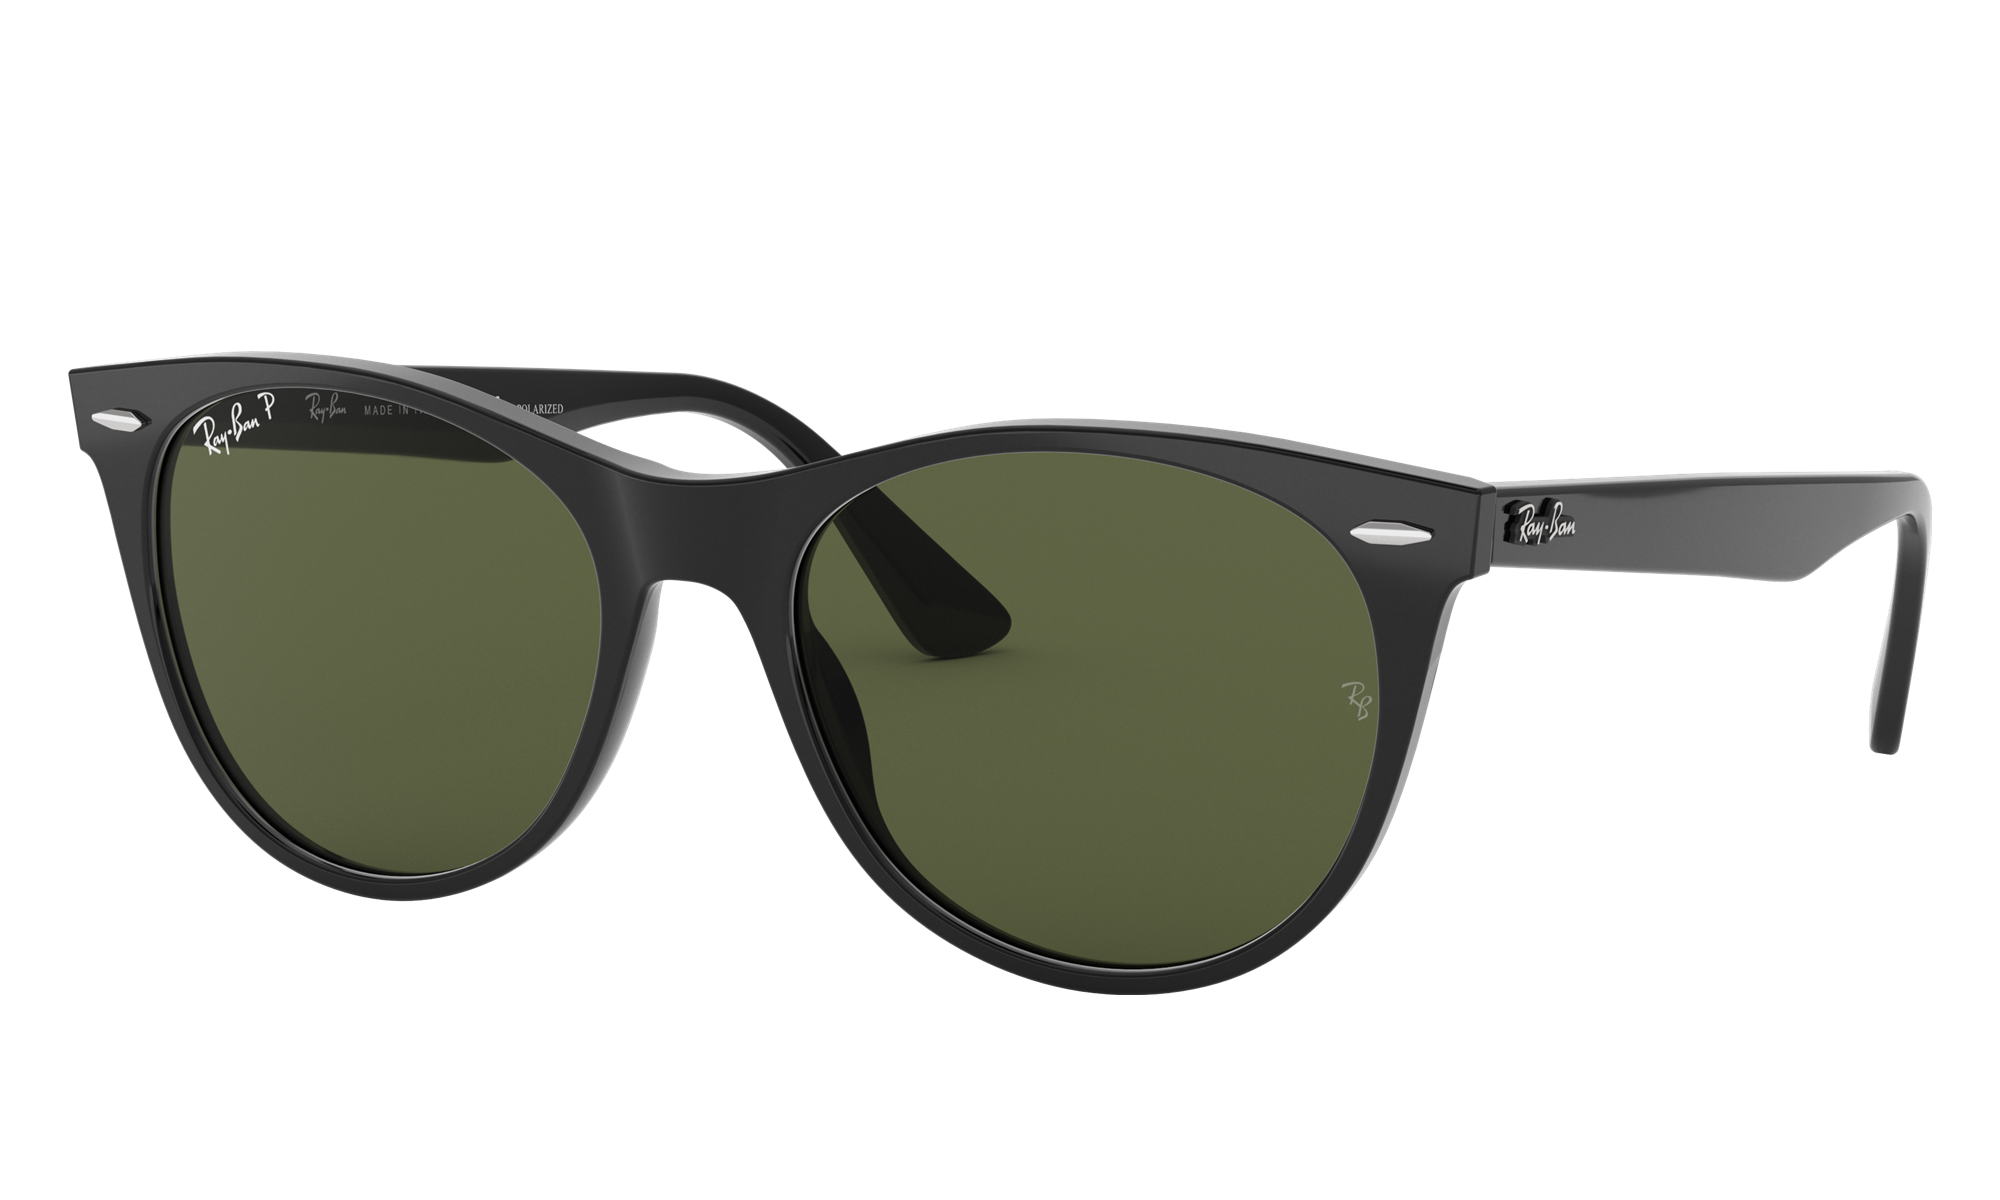 Ray-Ban Unisex Rb2185 Black Size: Small